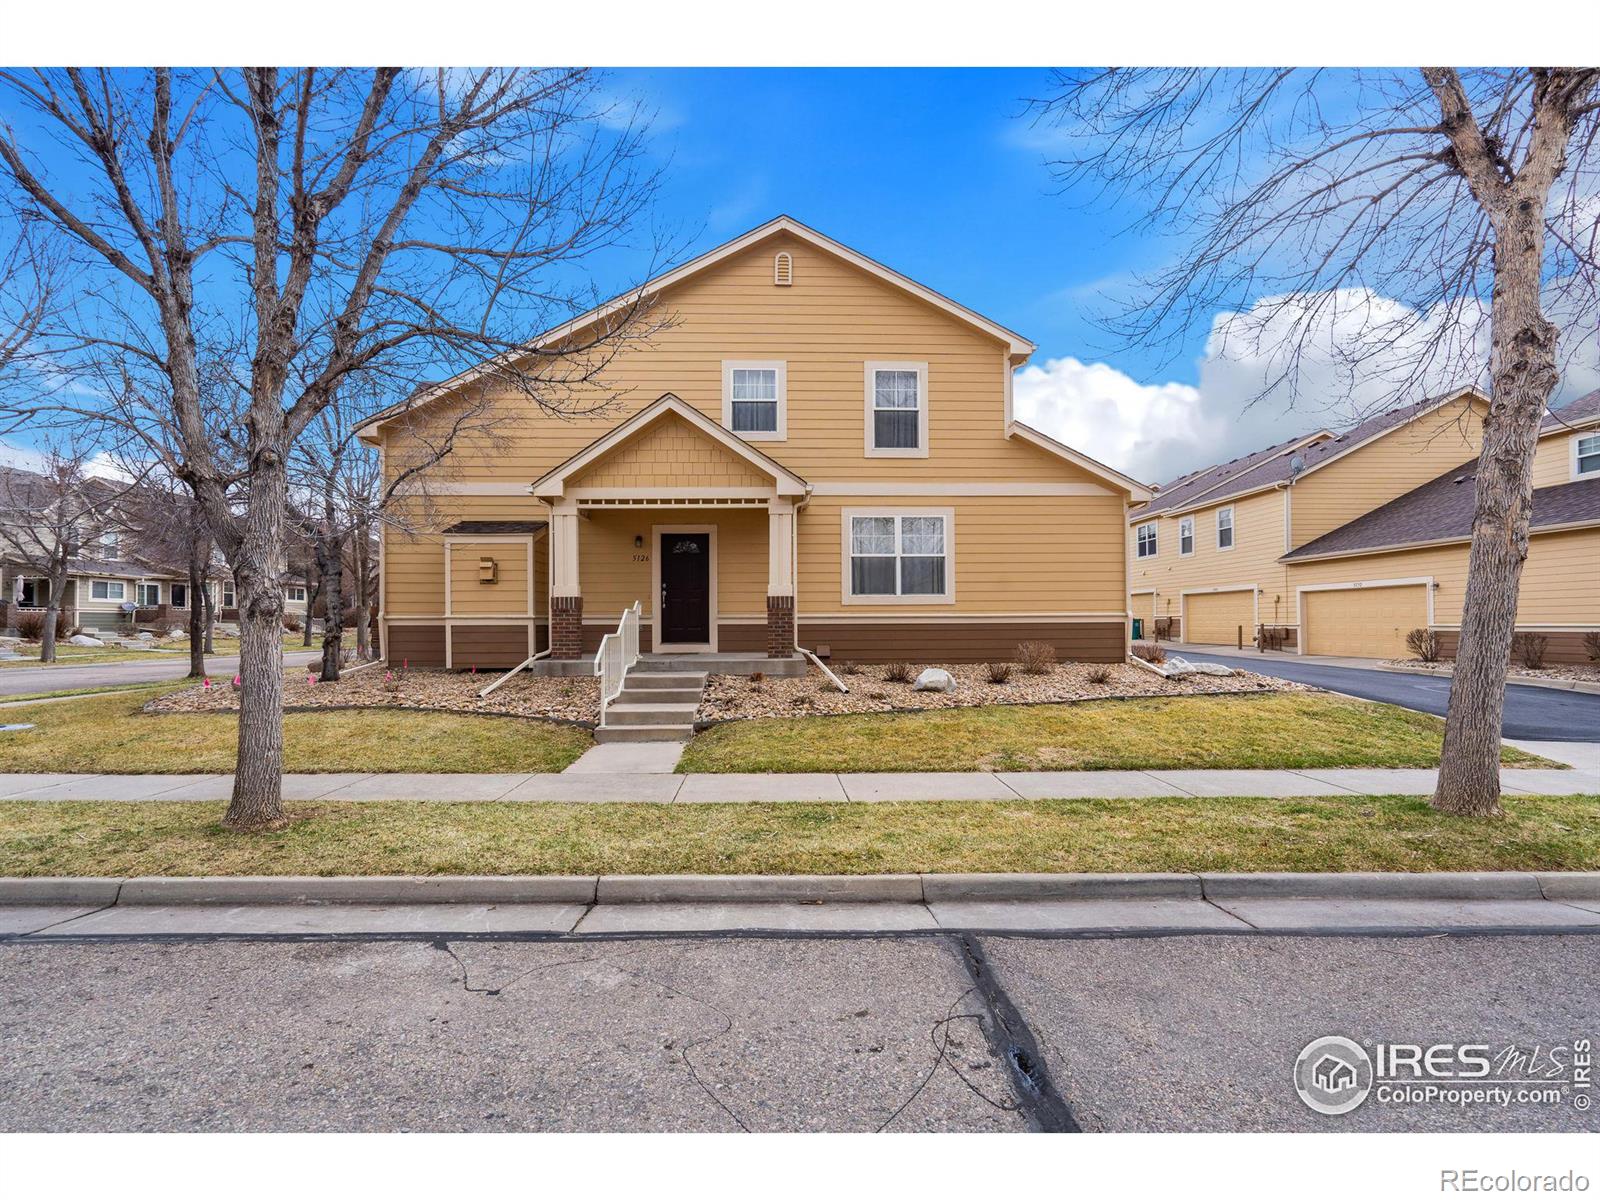 5126  Mill Stone Way, fort collins MLS: 4567891005534 Beds: 2 Baths: 3 Price: $439,000